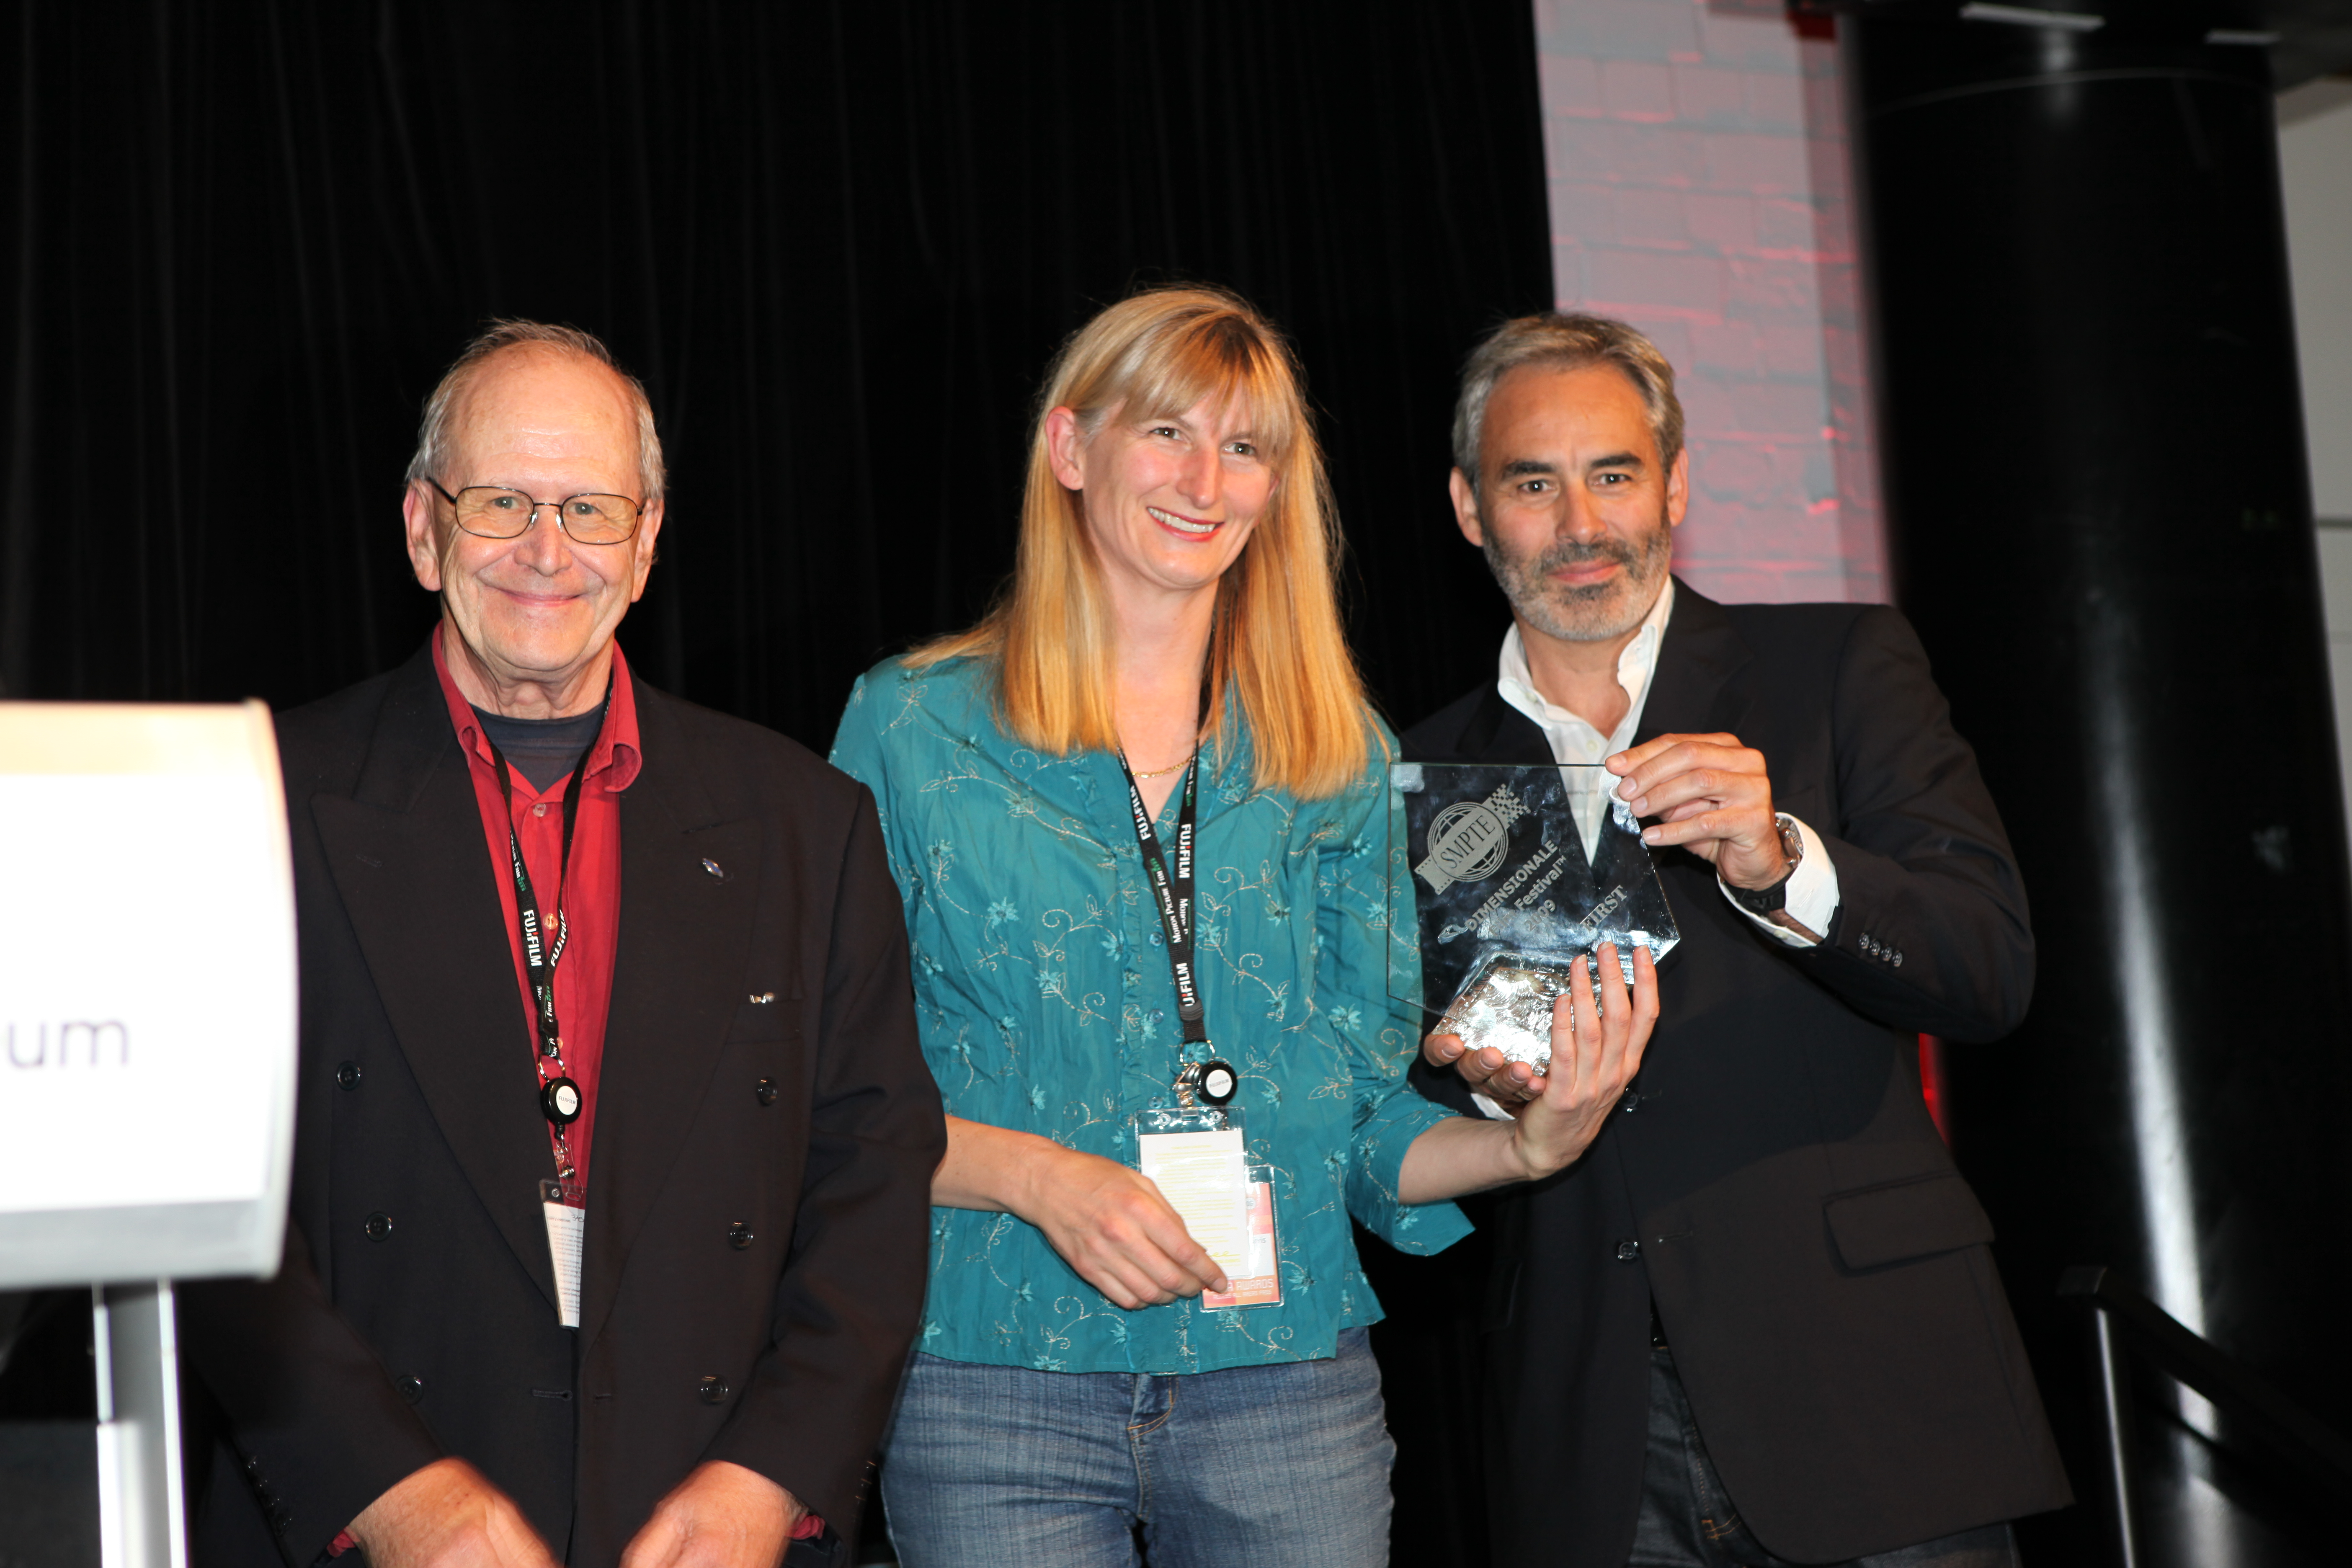 Olivier Parthonnaud and Laura sivis accepting the First Prize for S21-3D at Dimensionale 3D Film Festival Awards Gala